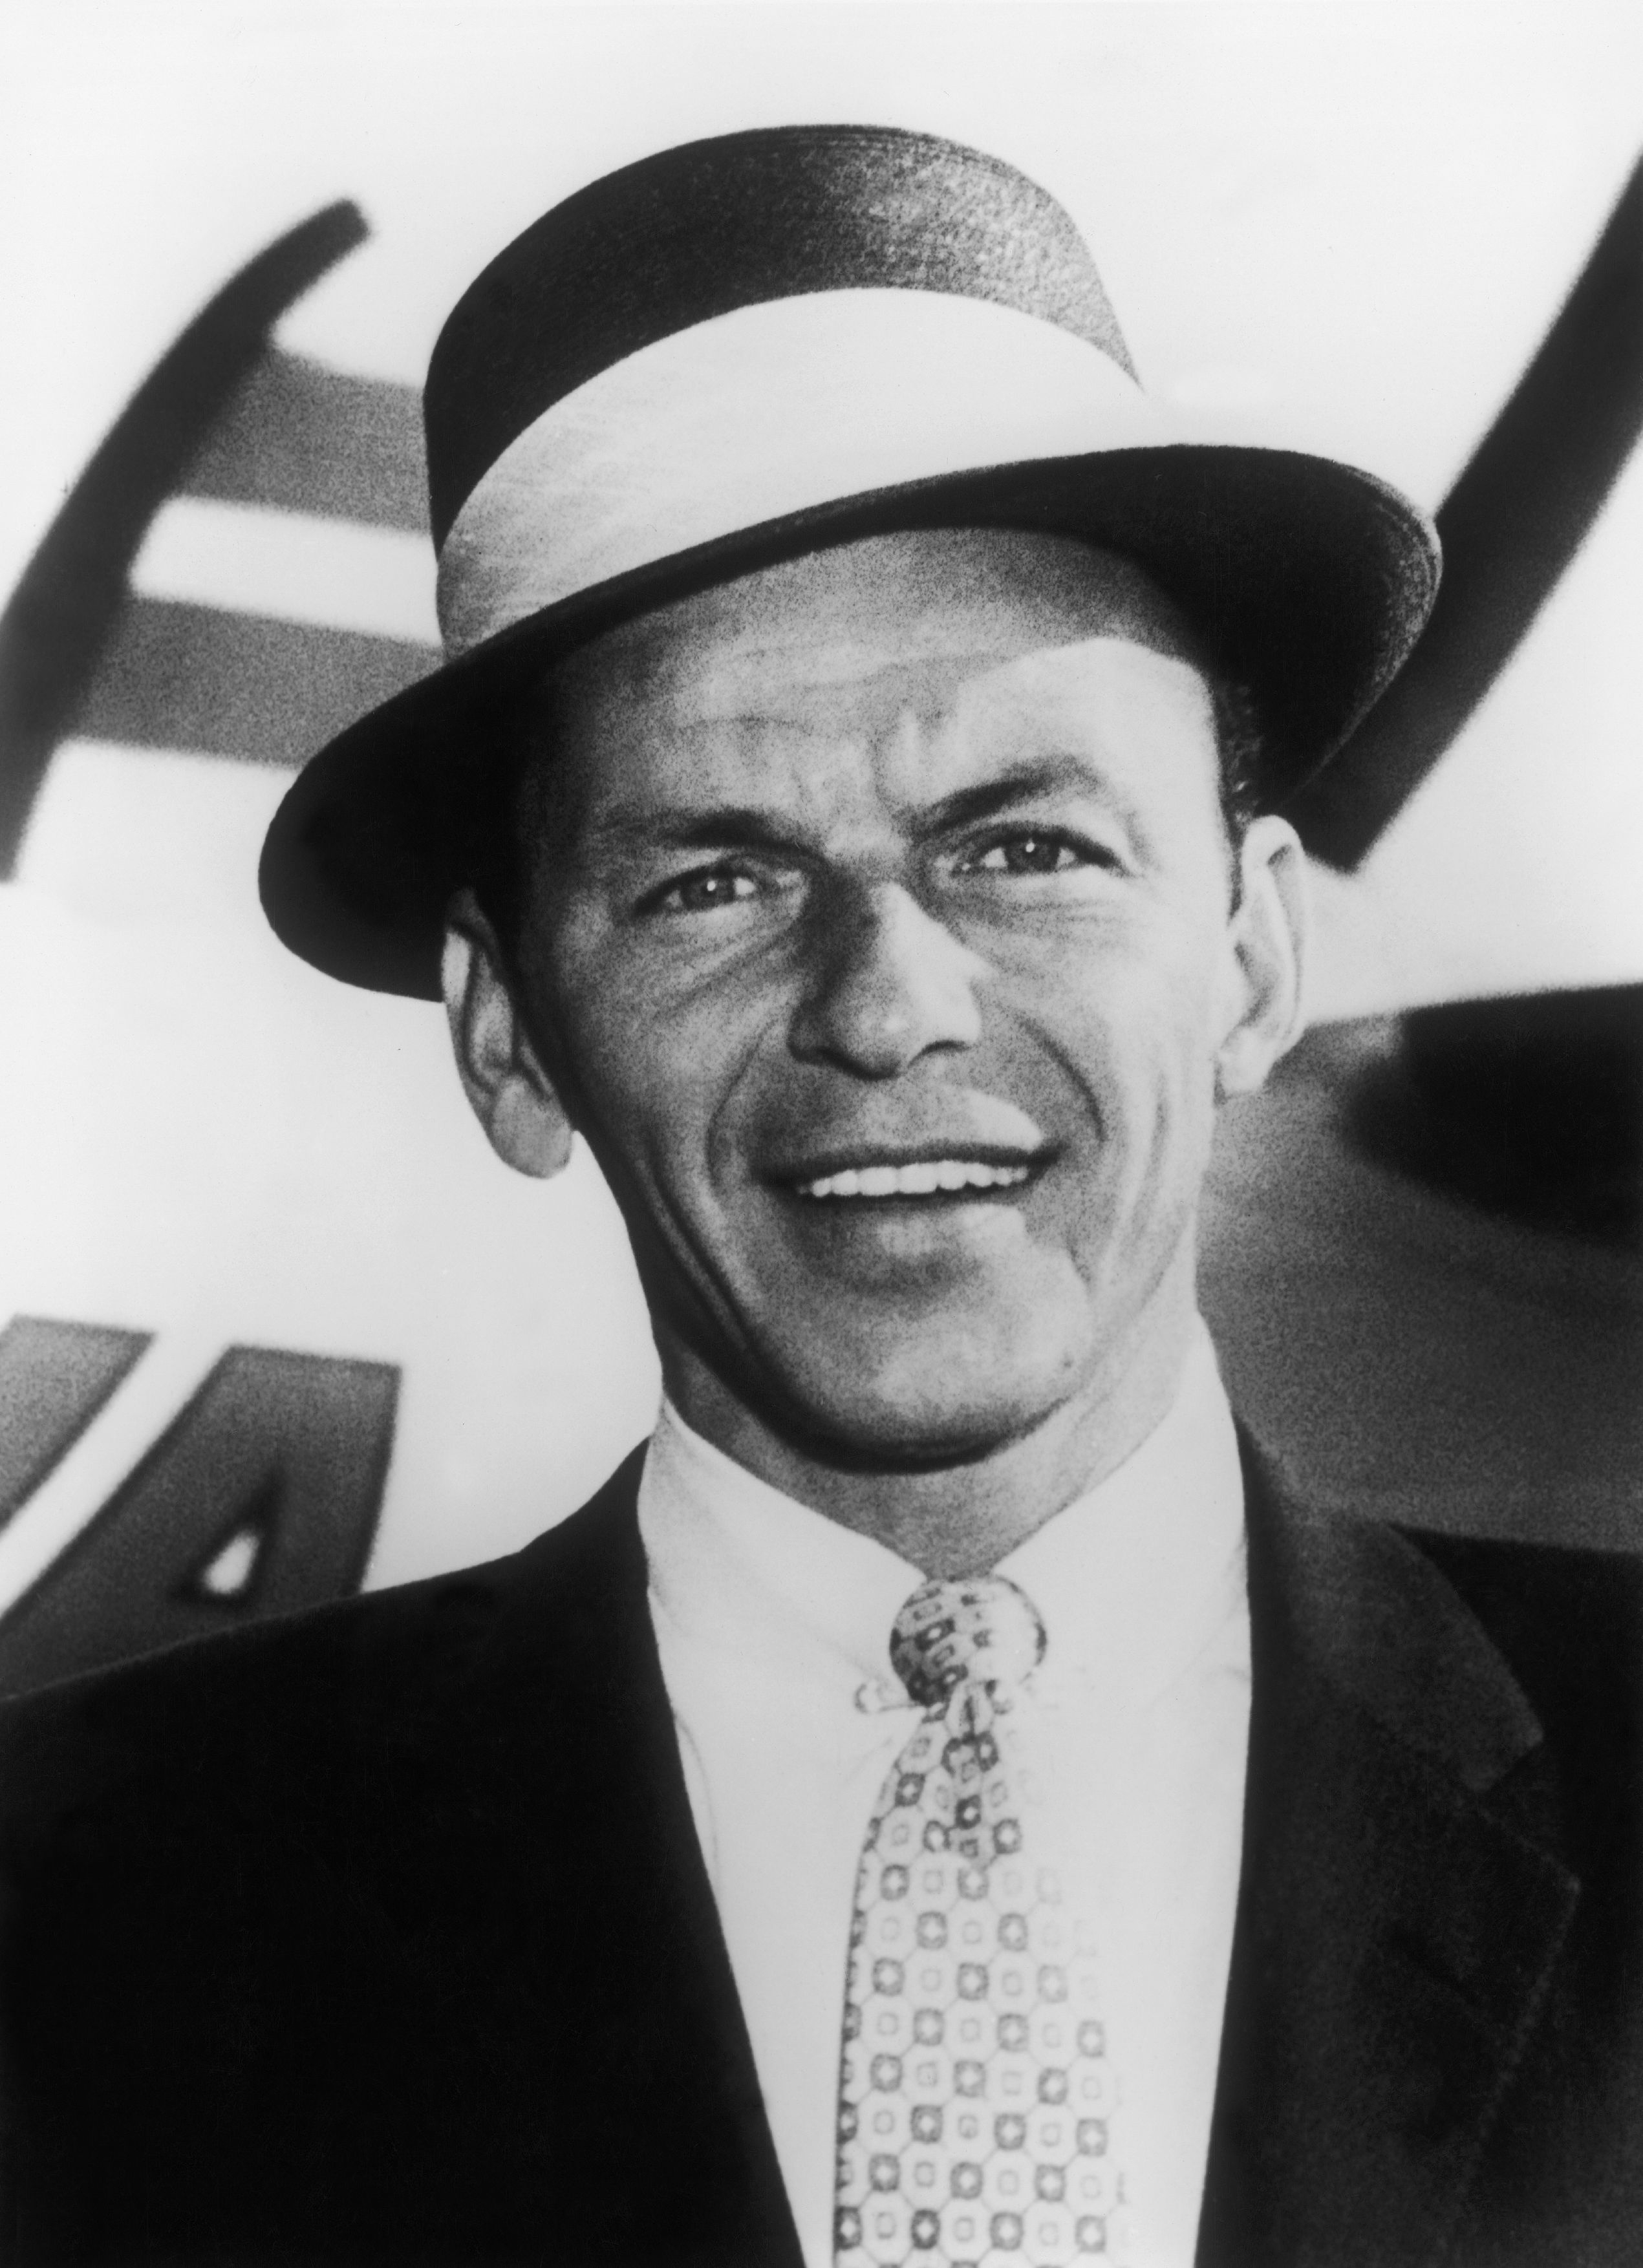 Frank Sinatra wearing a classic suit and fedora hat